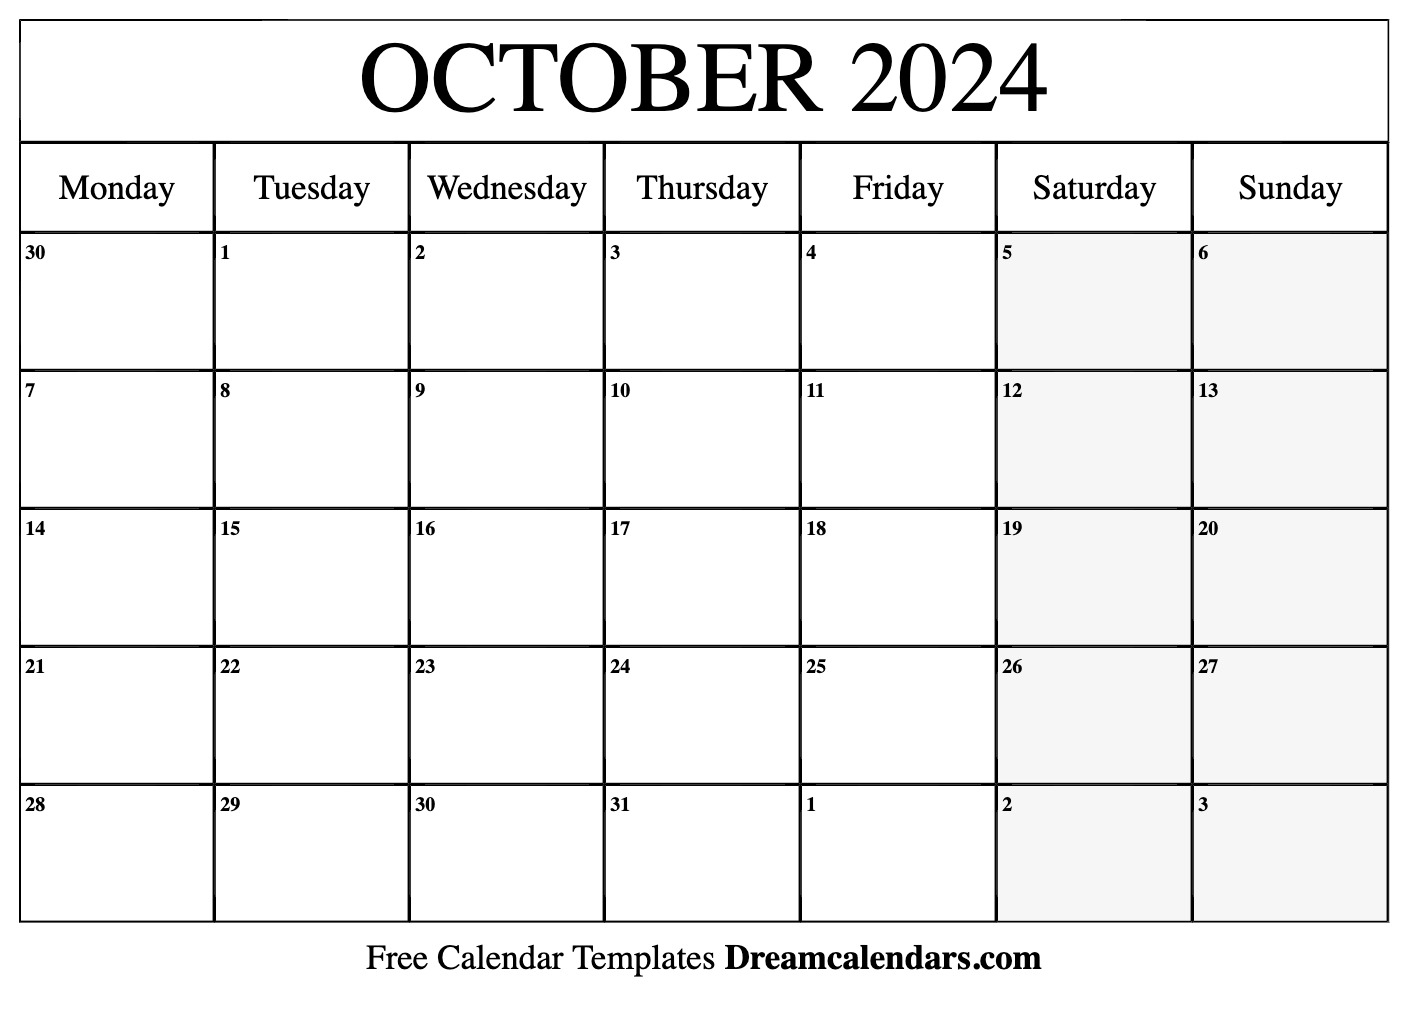 October 2024 Calendar | Free Blank Printable With Holidays for Free Printable Calendar October 2024